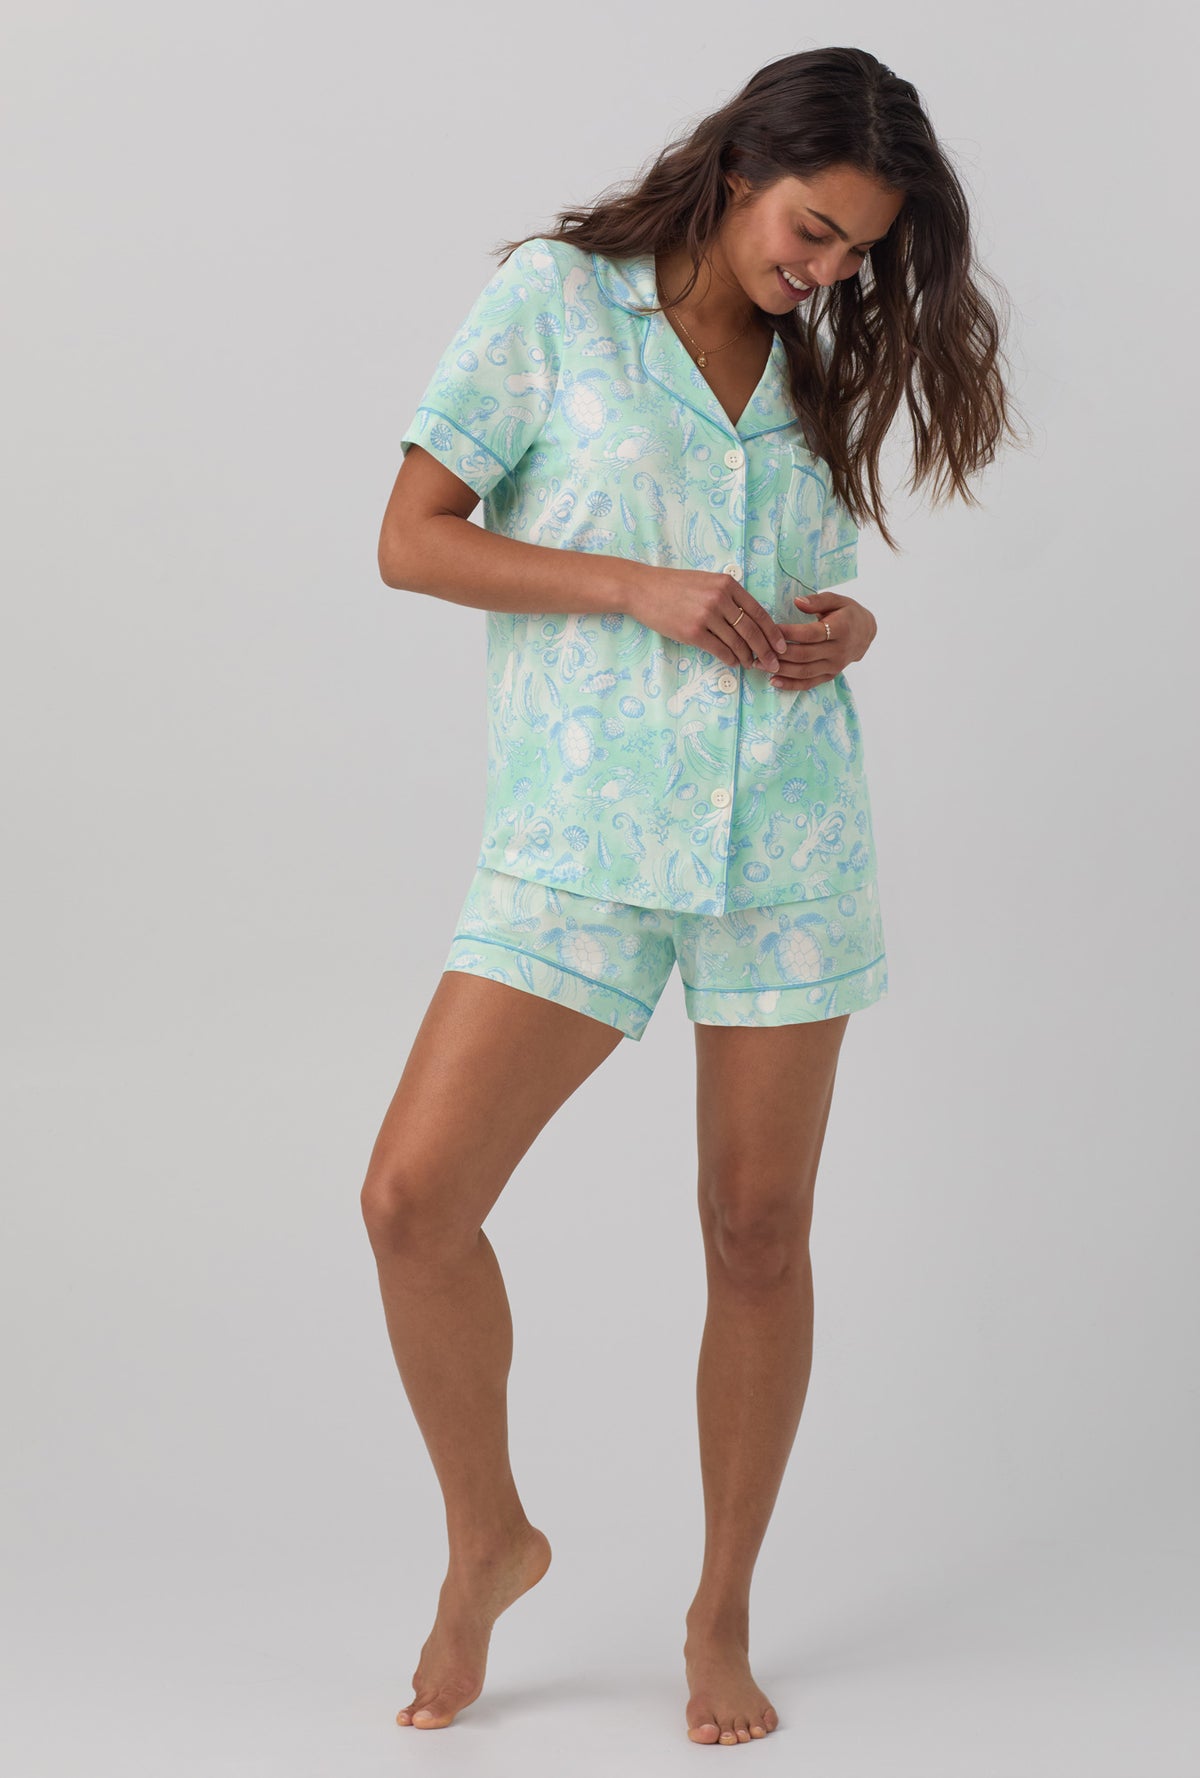 A lady wearing white short sleeve classic shorty stretch jerset pj set with aquatic life print